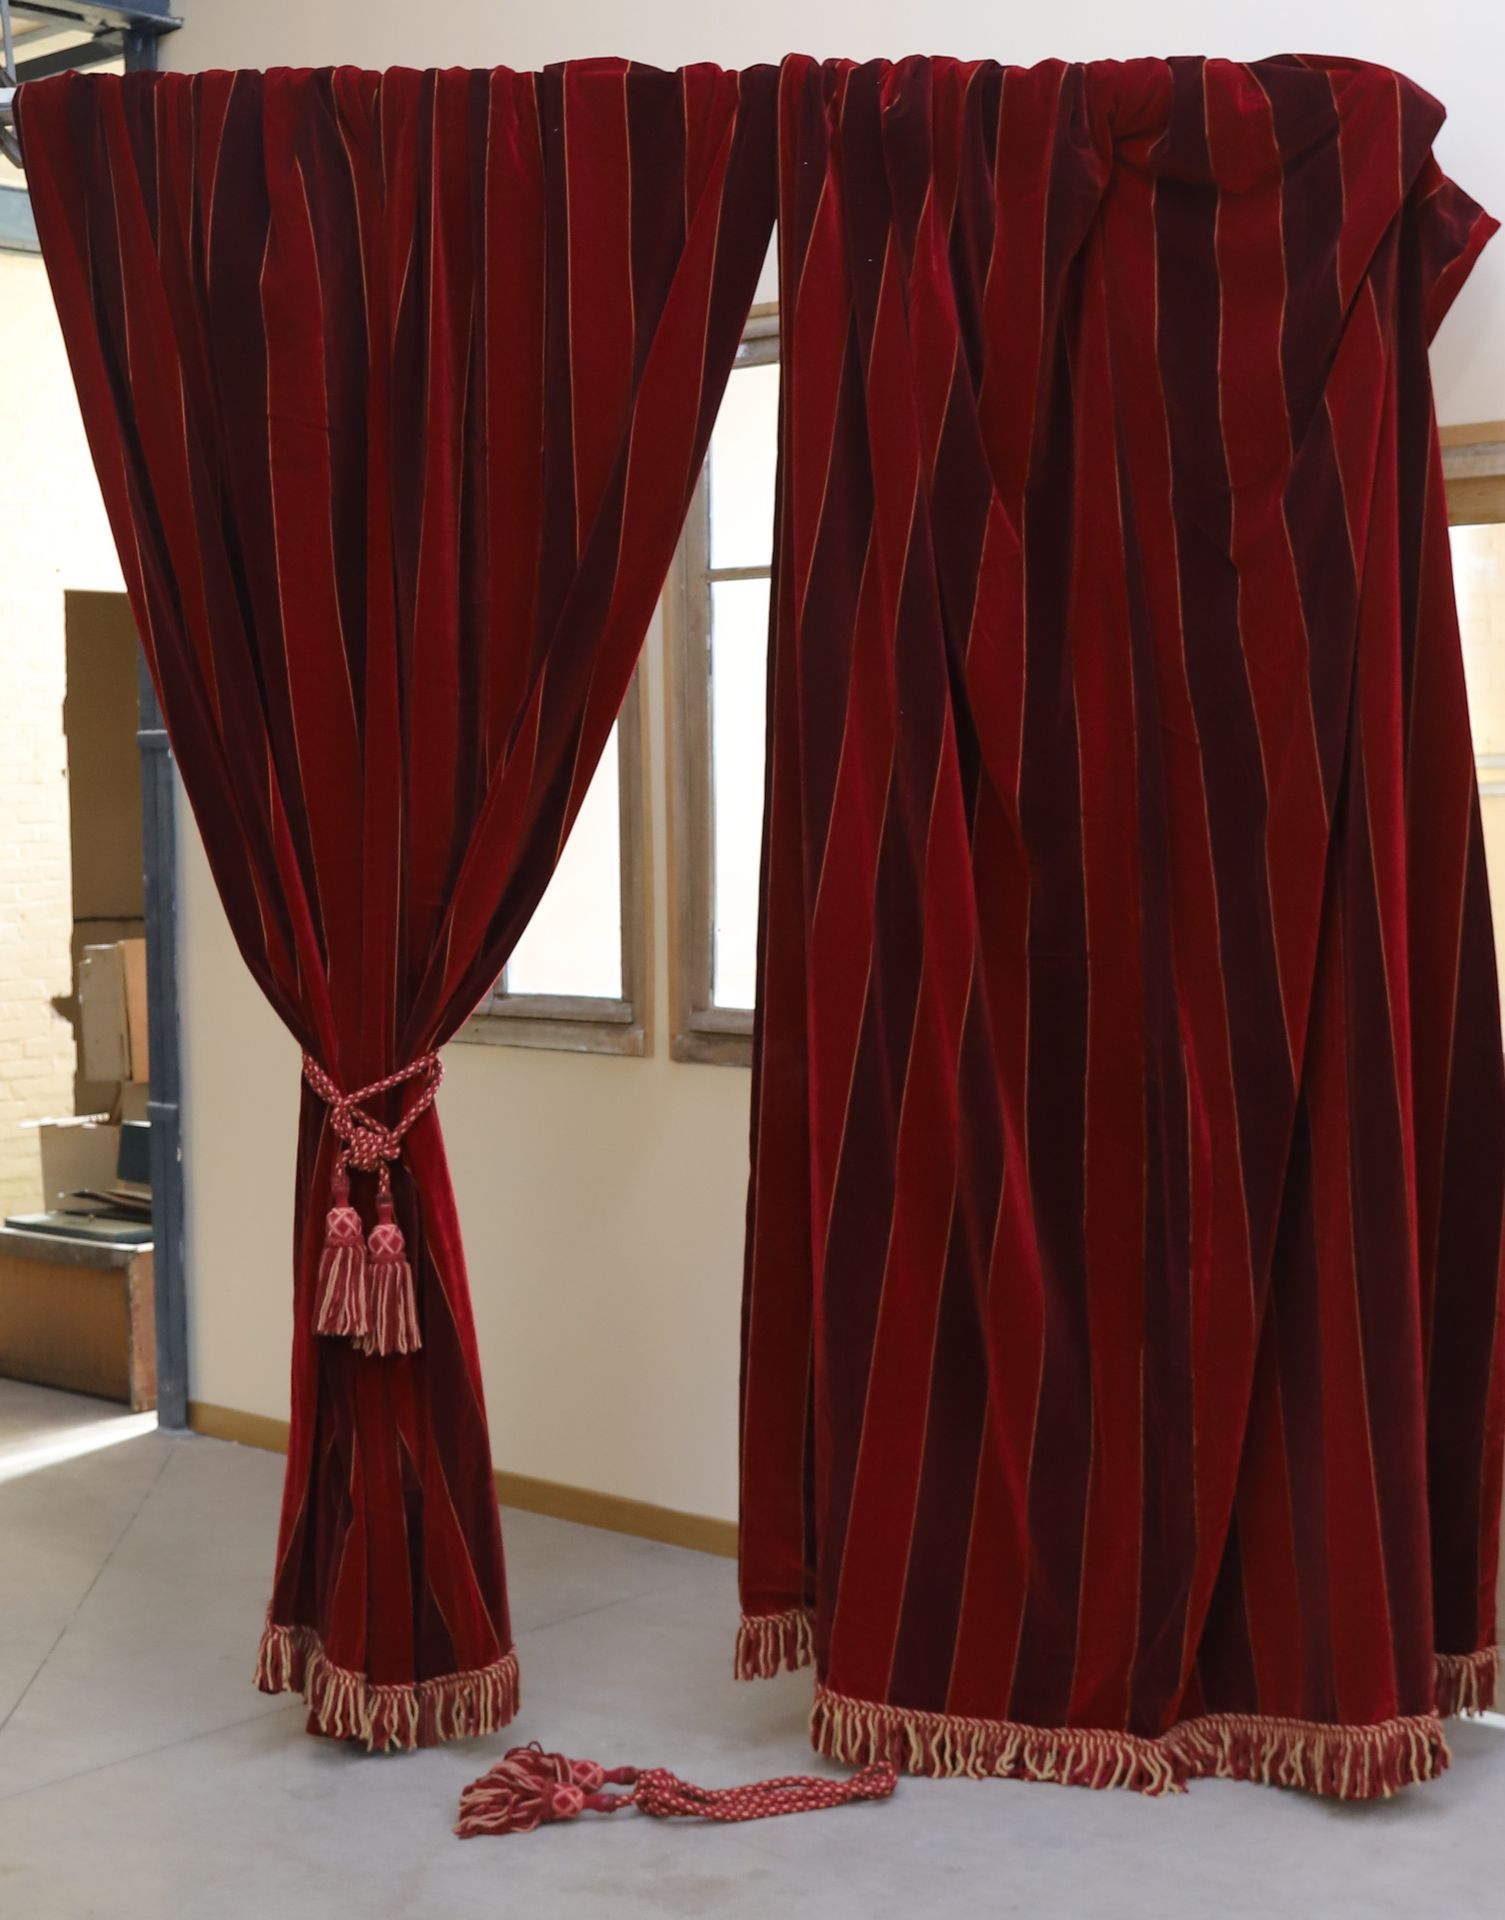 Null ELEGANT PAIR OF LARGE RED VELVET CURTAINS STRIPED AND EDGED WITH GOLD
Finis&hellip;